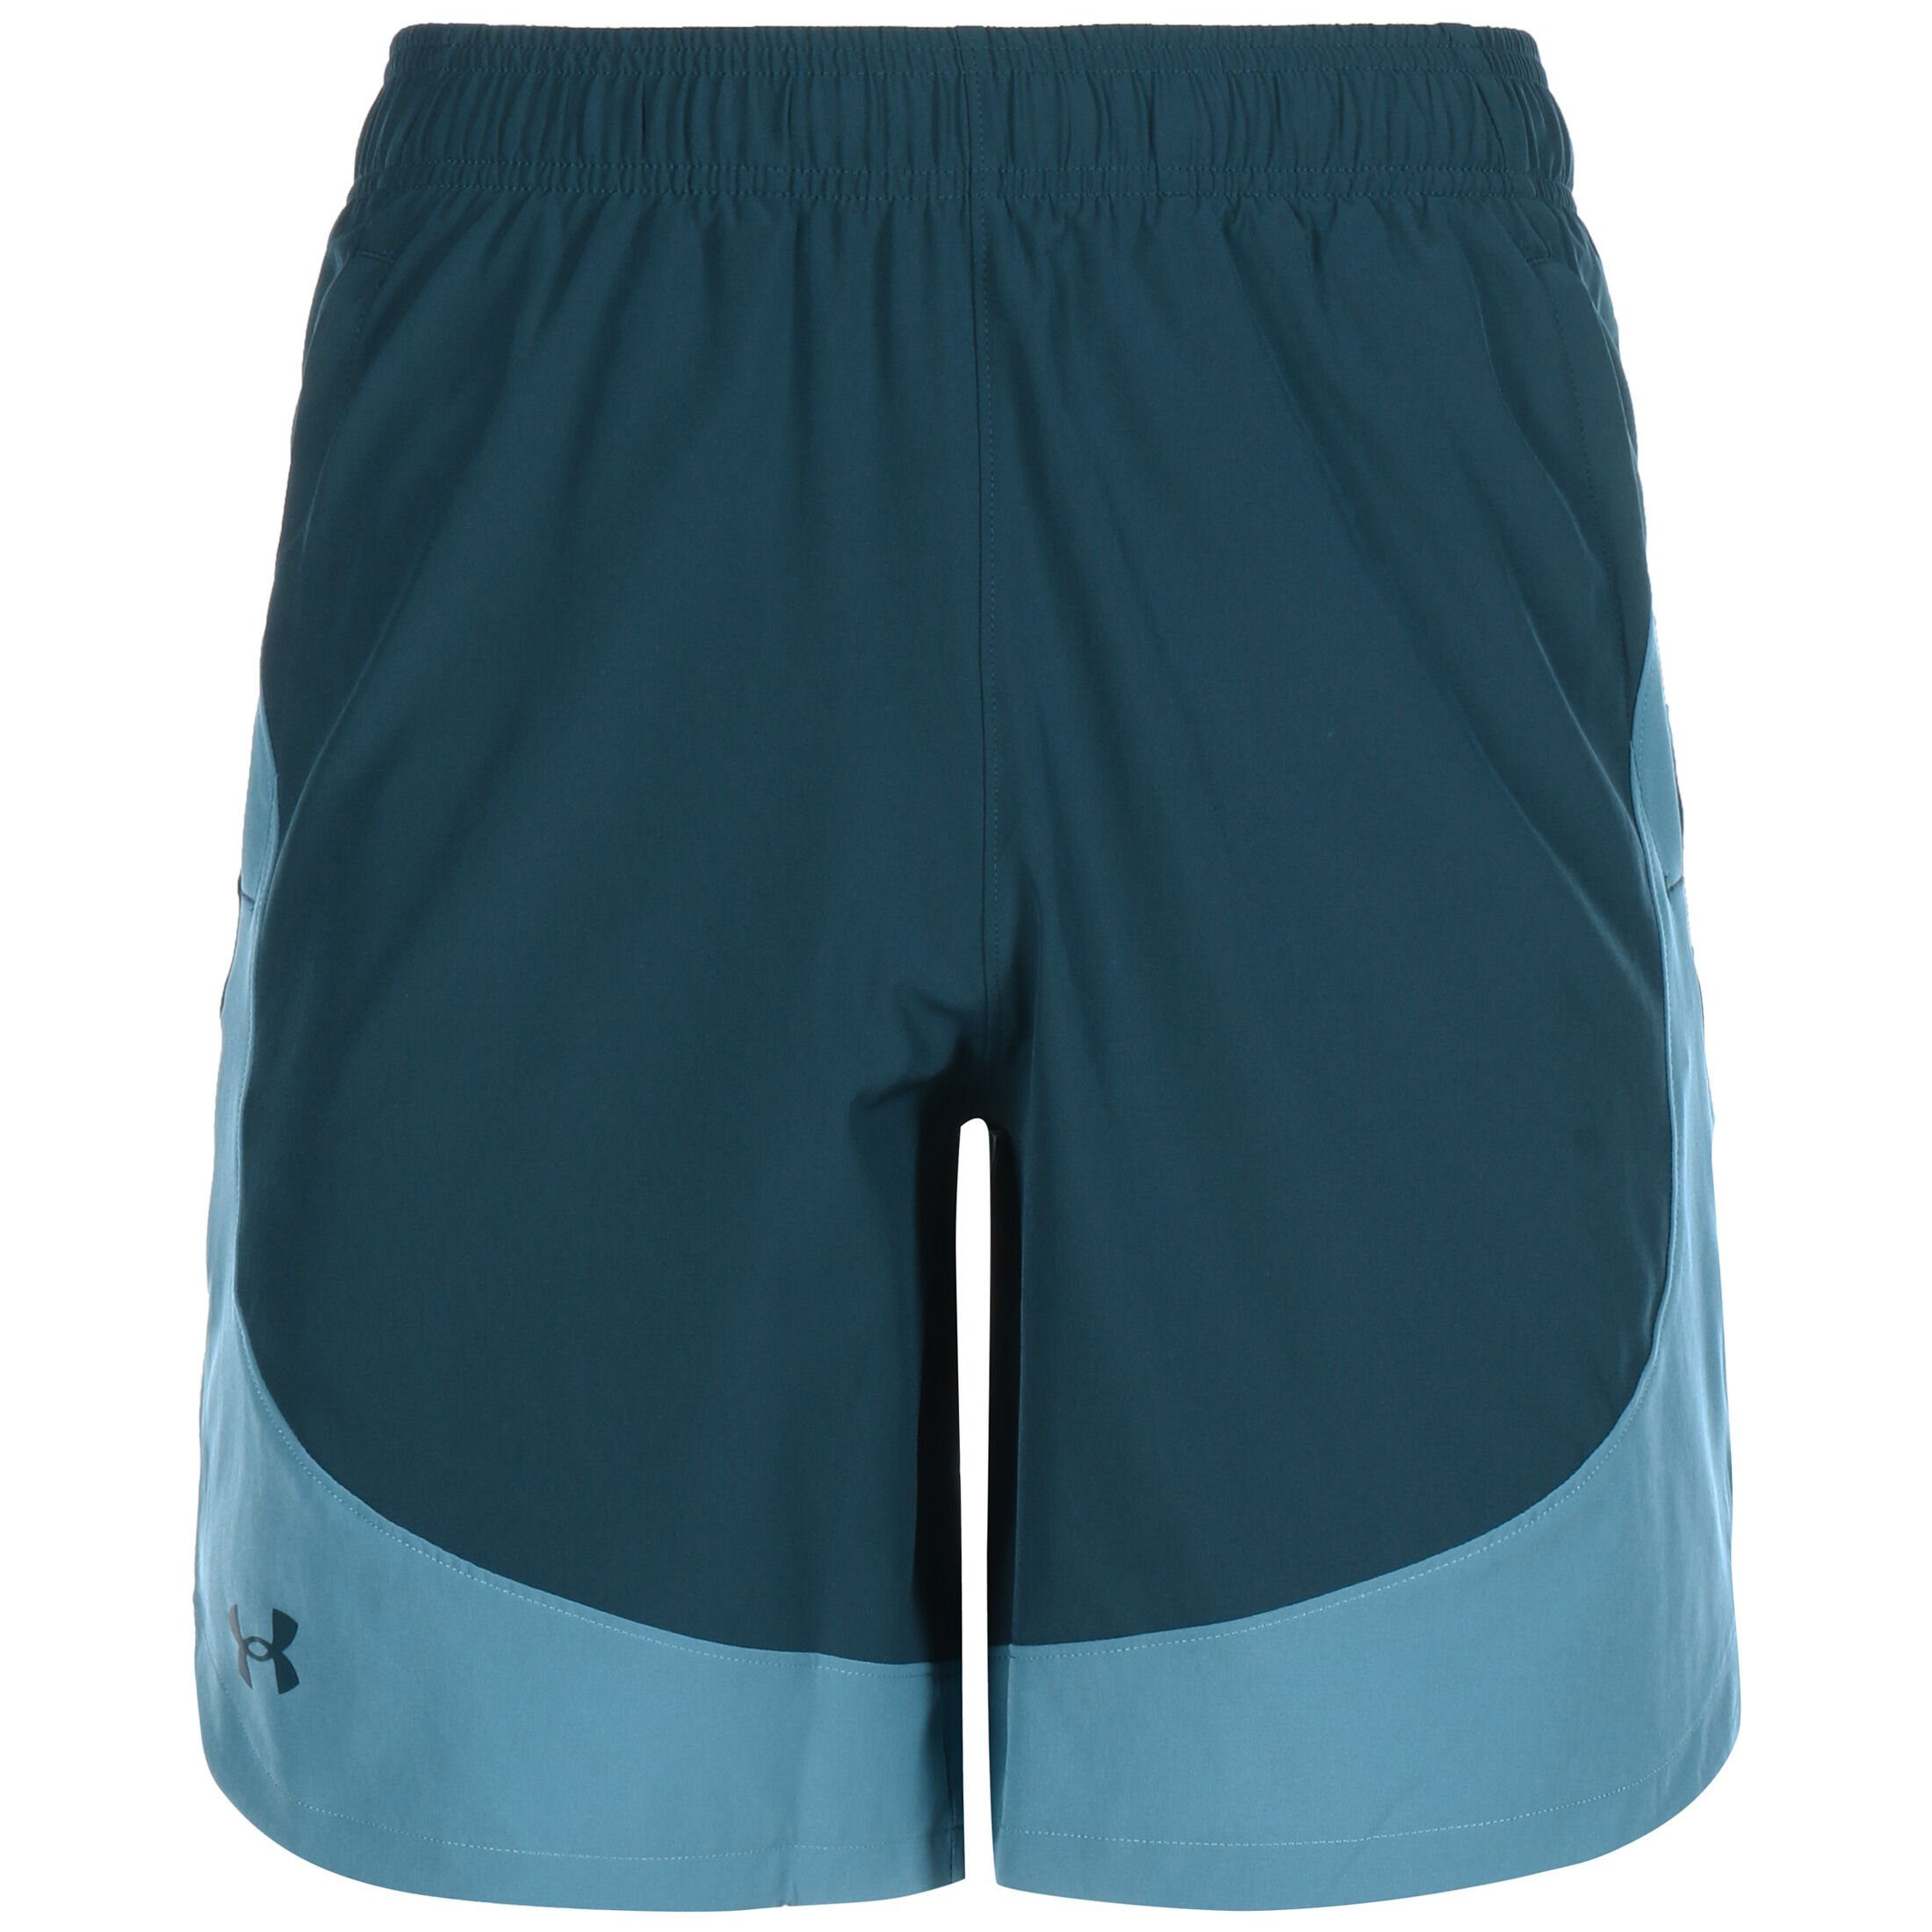 Under Armour® Trainingsshorts HIIT Woven Colorblock Trainingsshorts Herren blau | Sportshorts